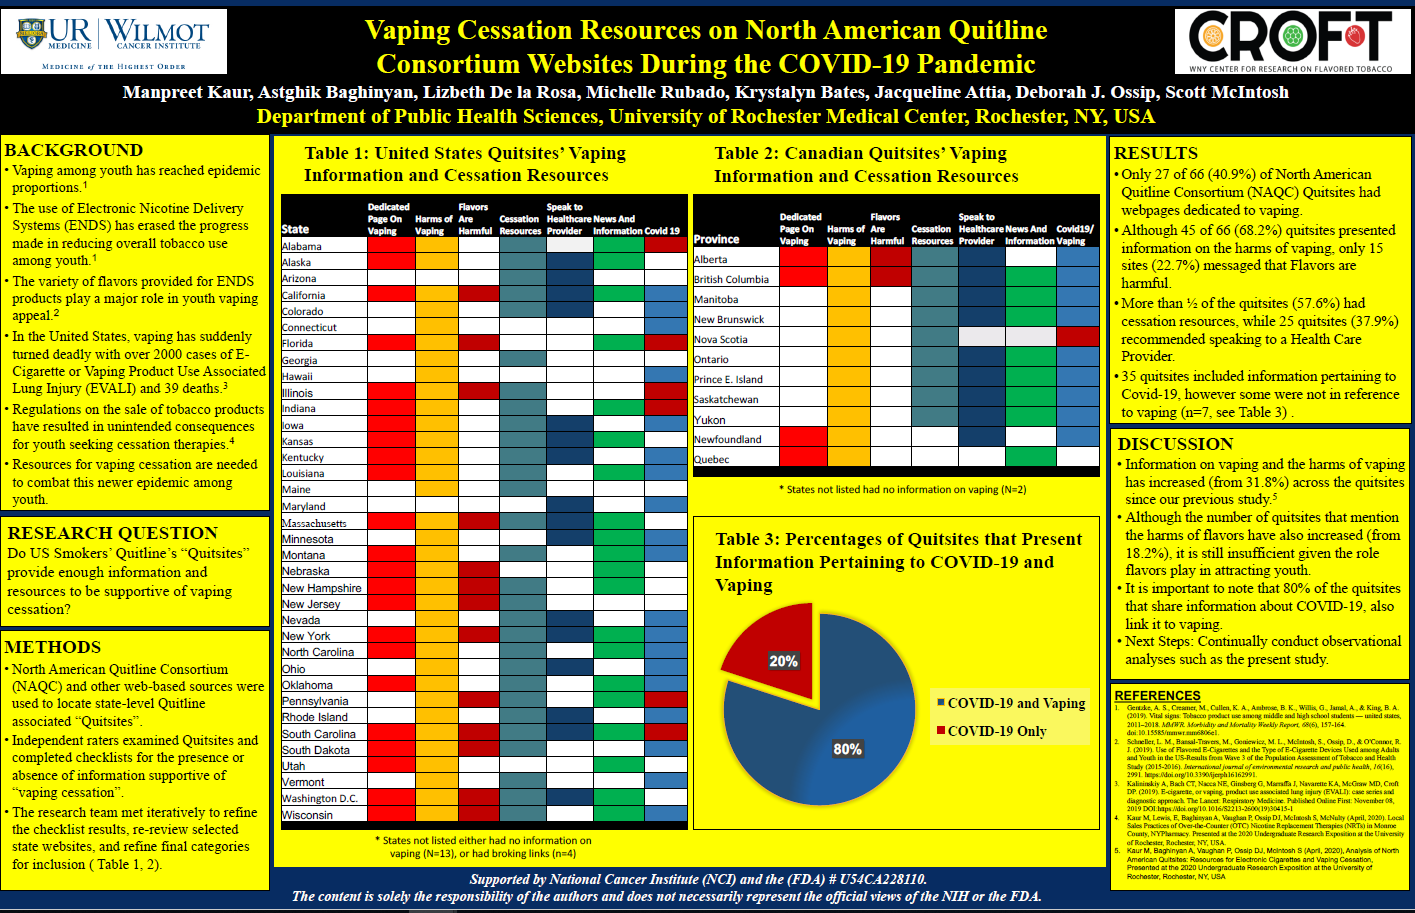 Vaping Cessation Resources on North American Quitline Consortium Websites During the COVID-19 Pandemic